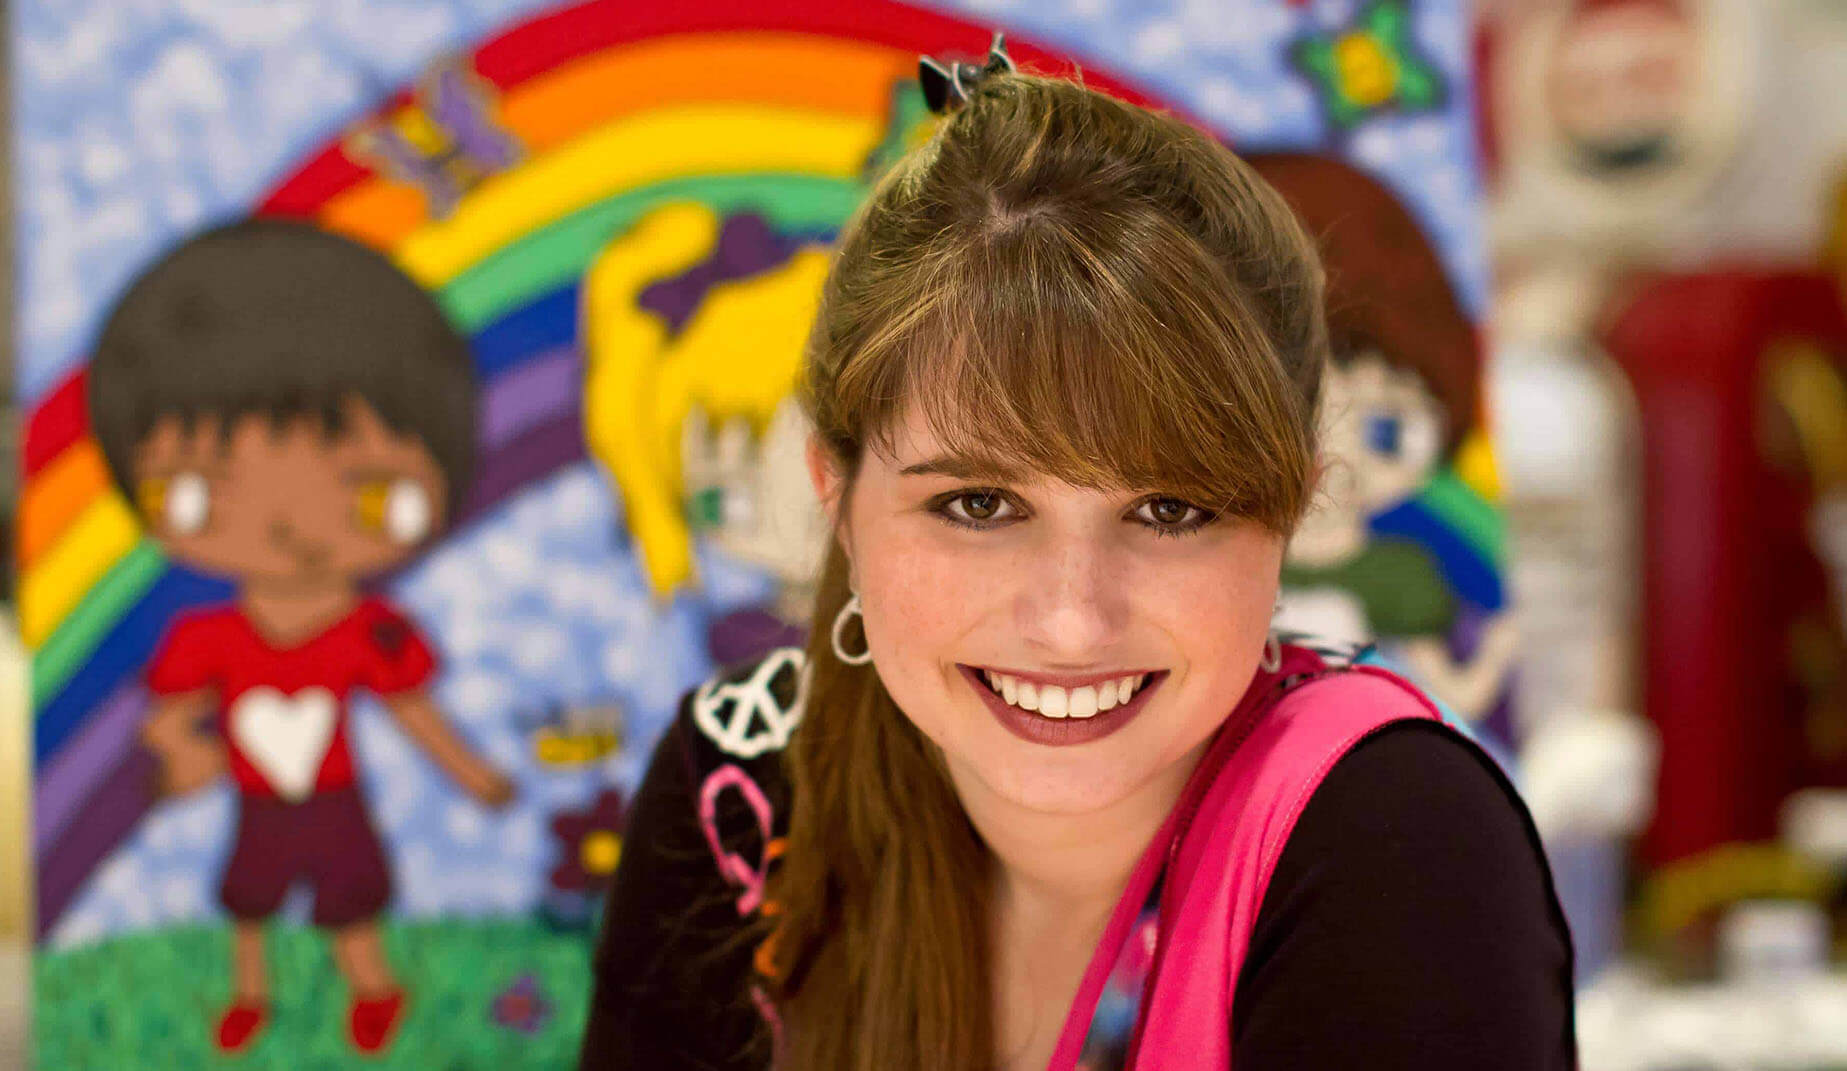 Listen to What Haley Moss Has to Say About Autism